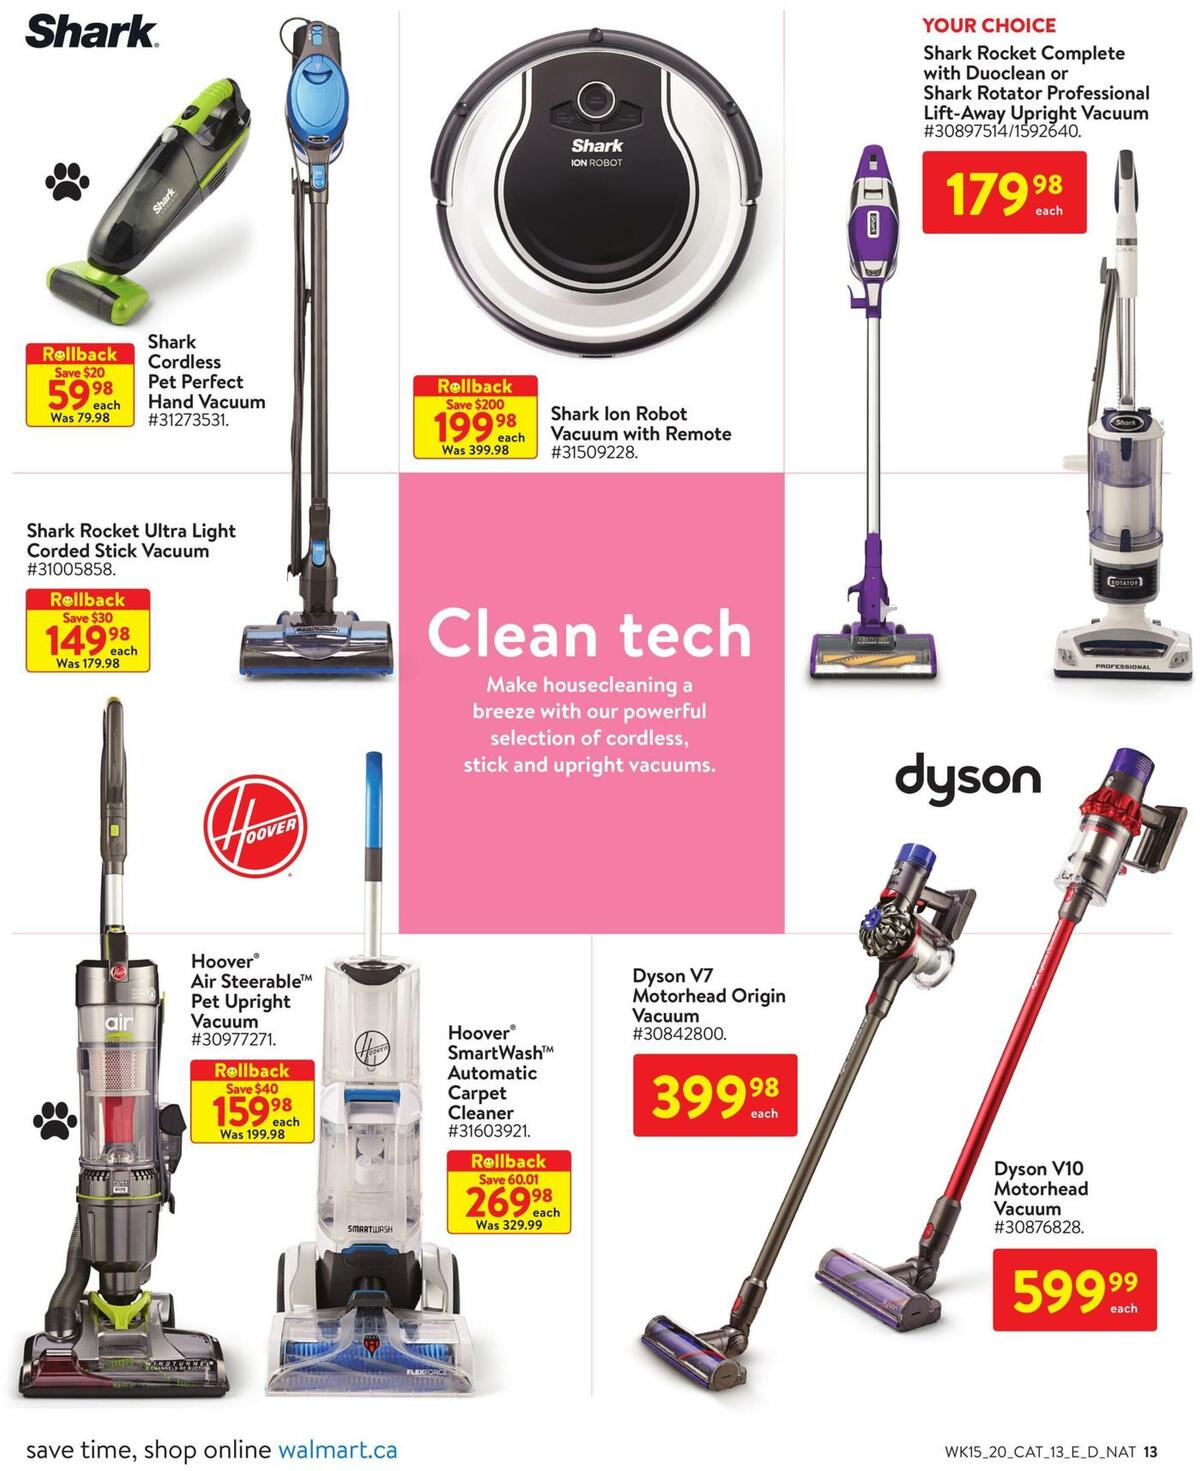 Walmart Home Flyer from April 30